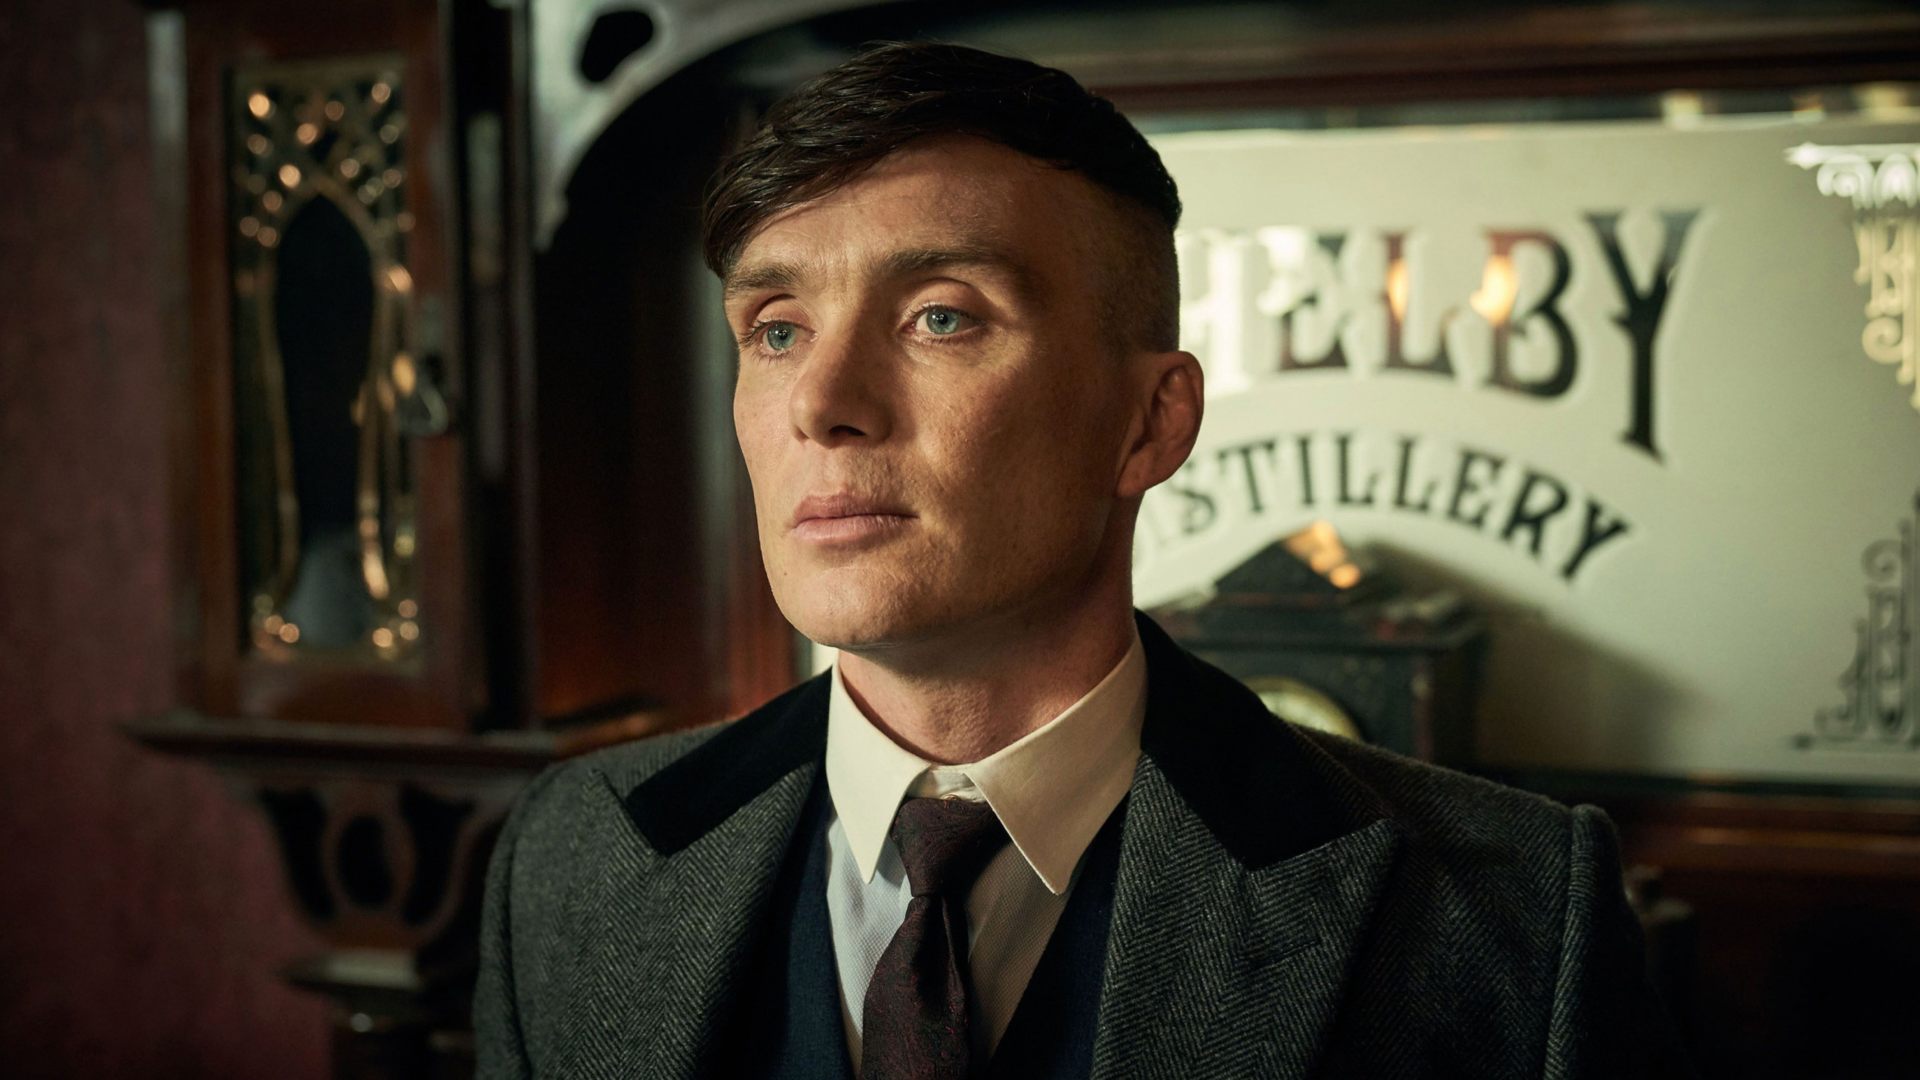 Peaky Blinders Facts - 30 Peaky Blinders Facts You Haven't Read Before